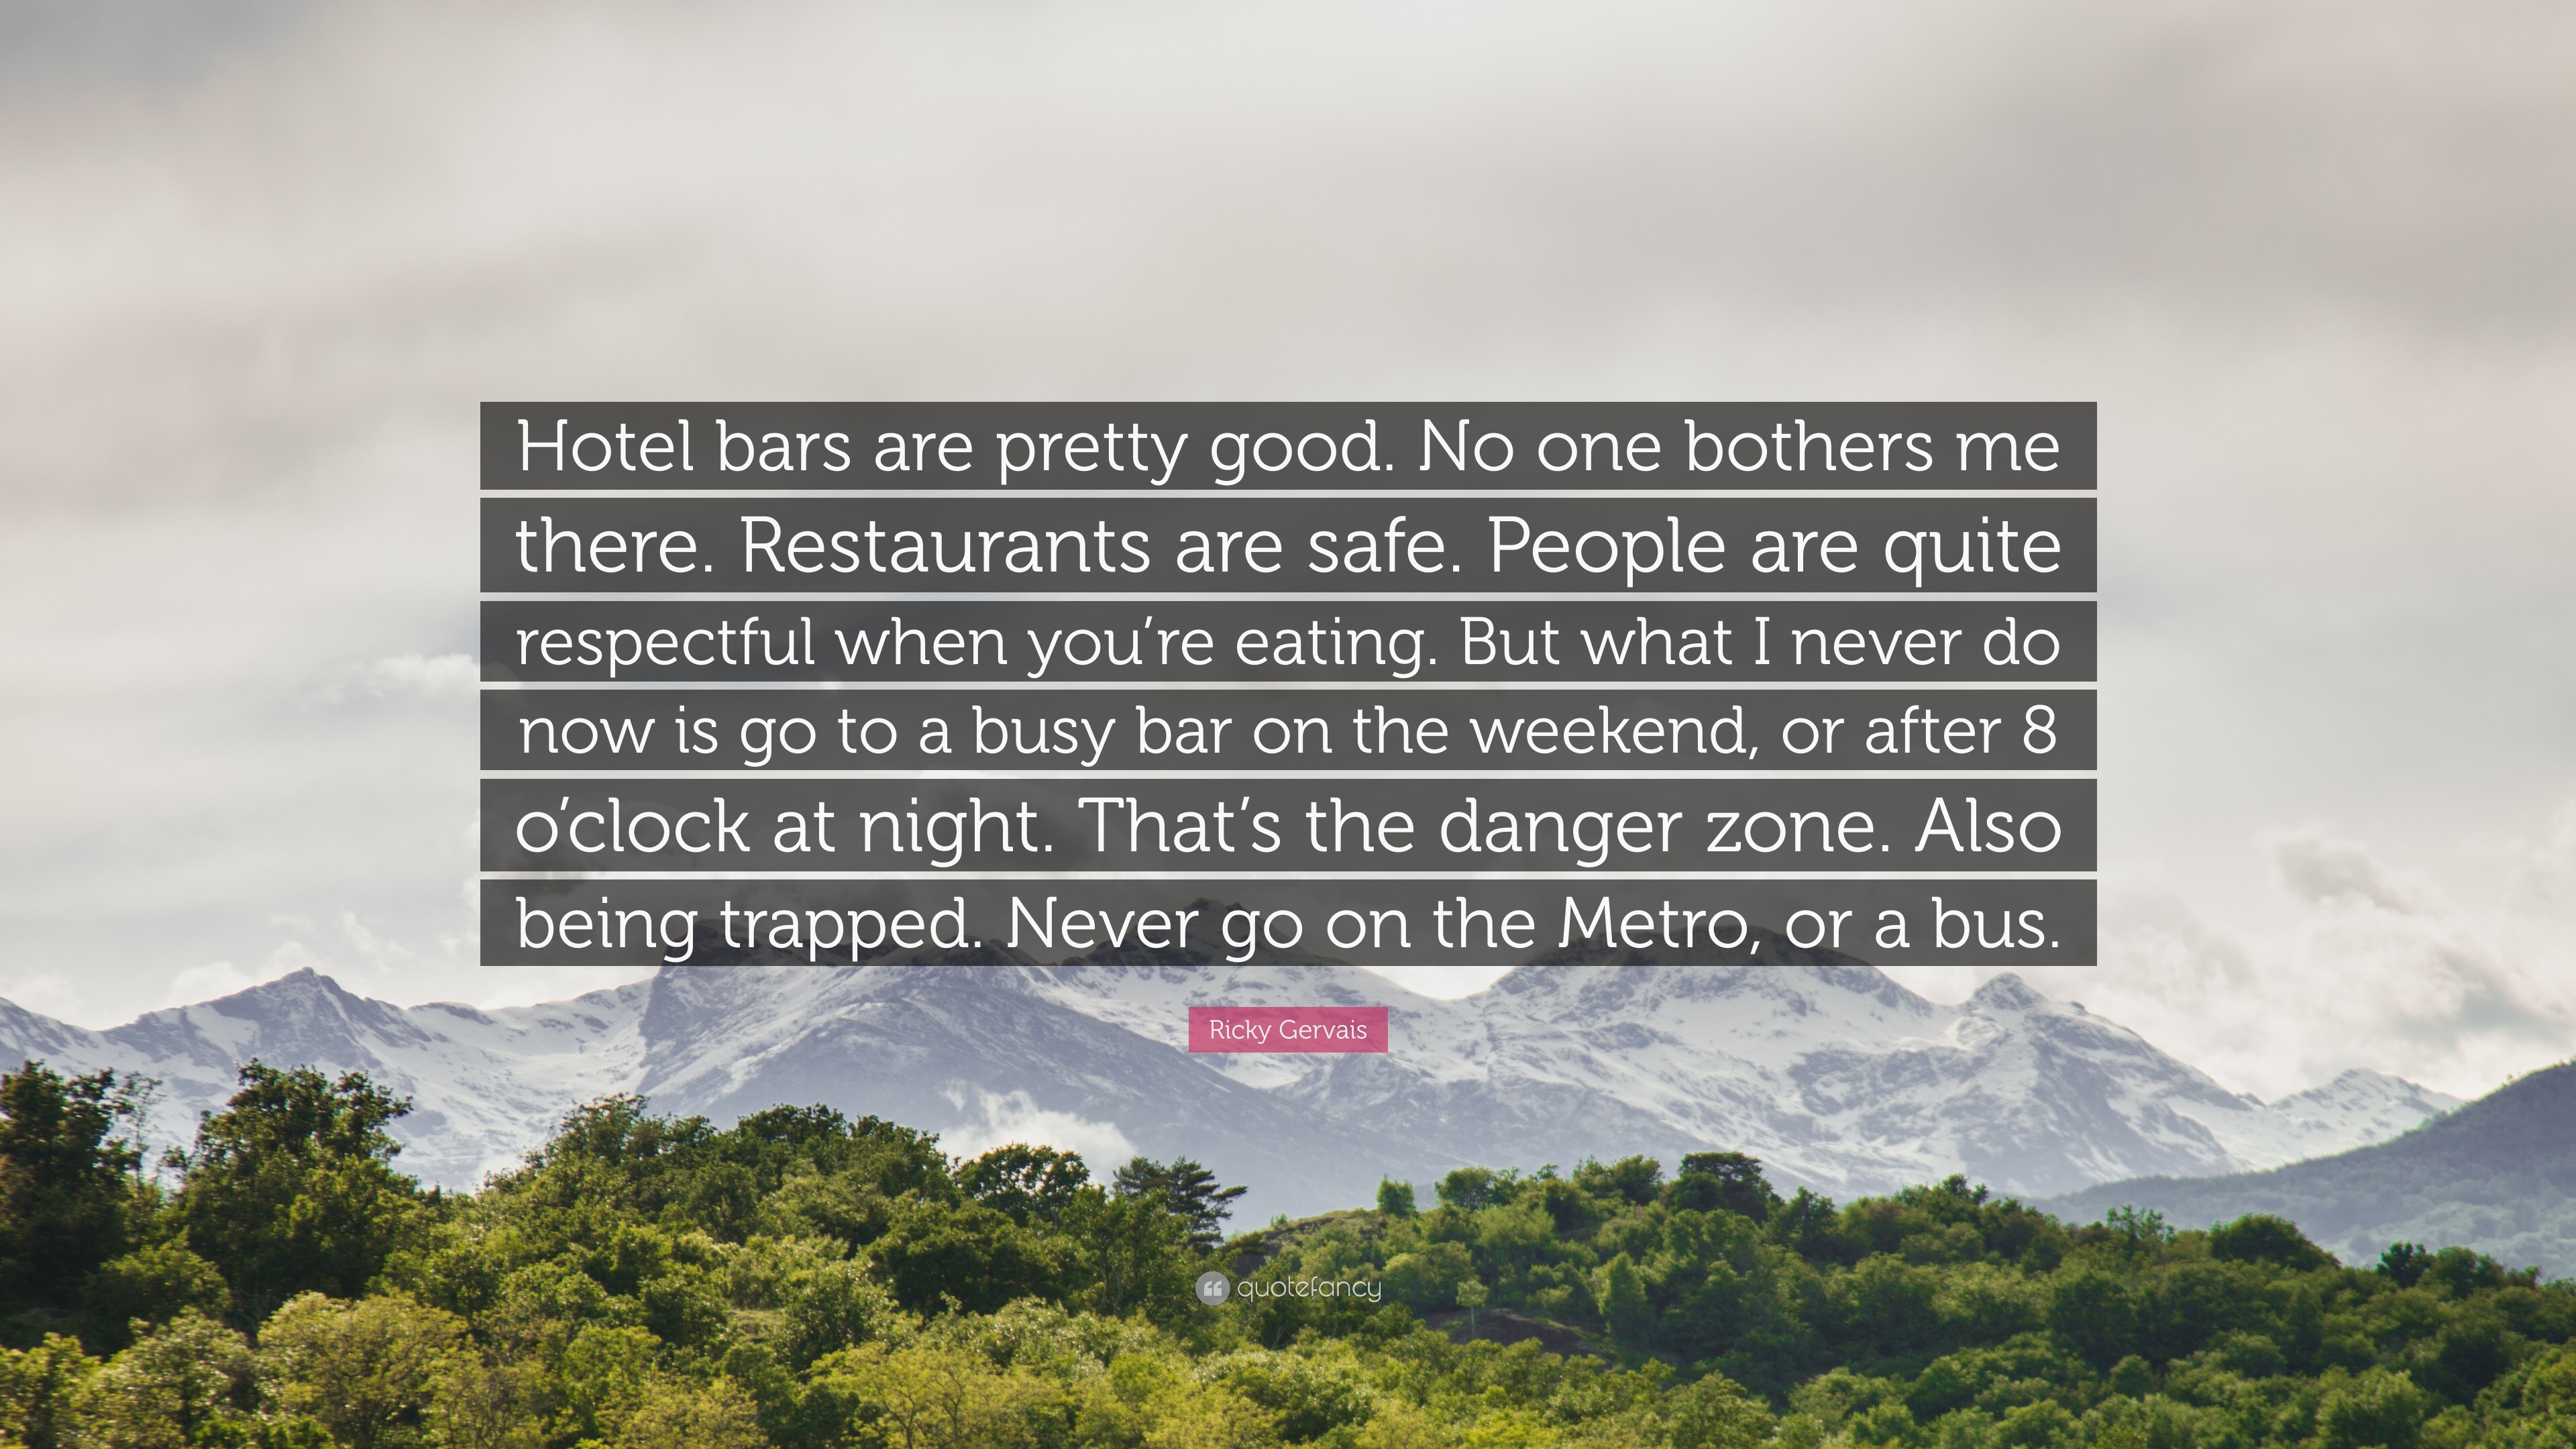 3840x2160 Ricky Gervais Quote: “Hotel bars are pretty good. No one bothers me there